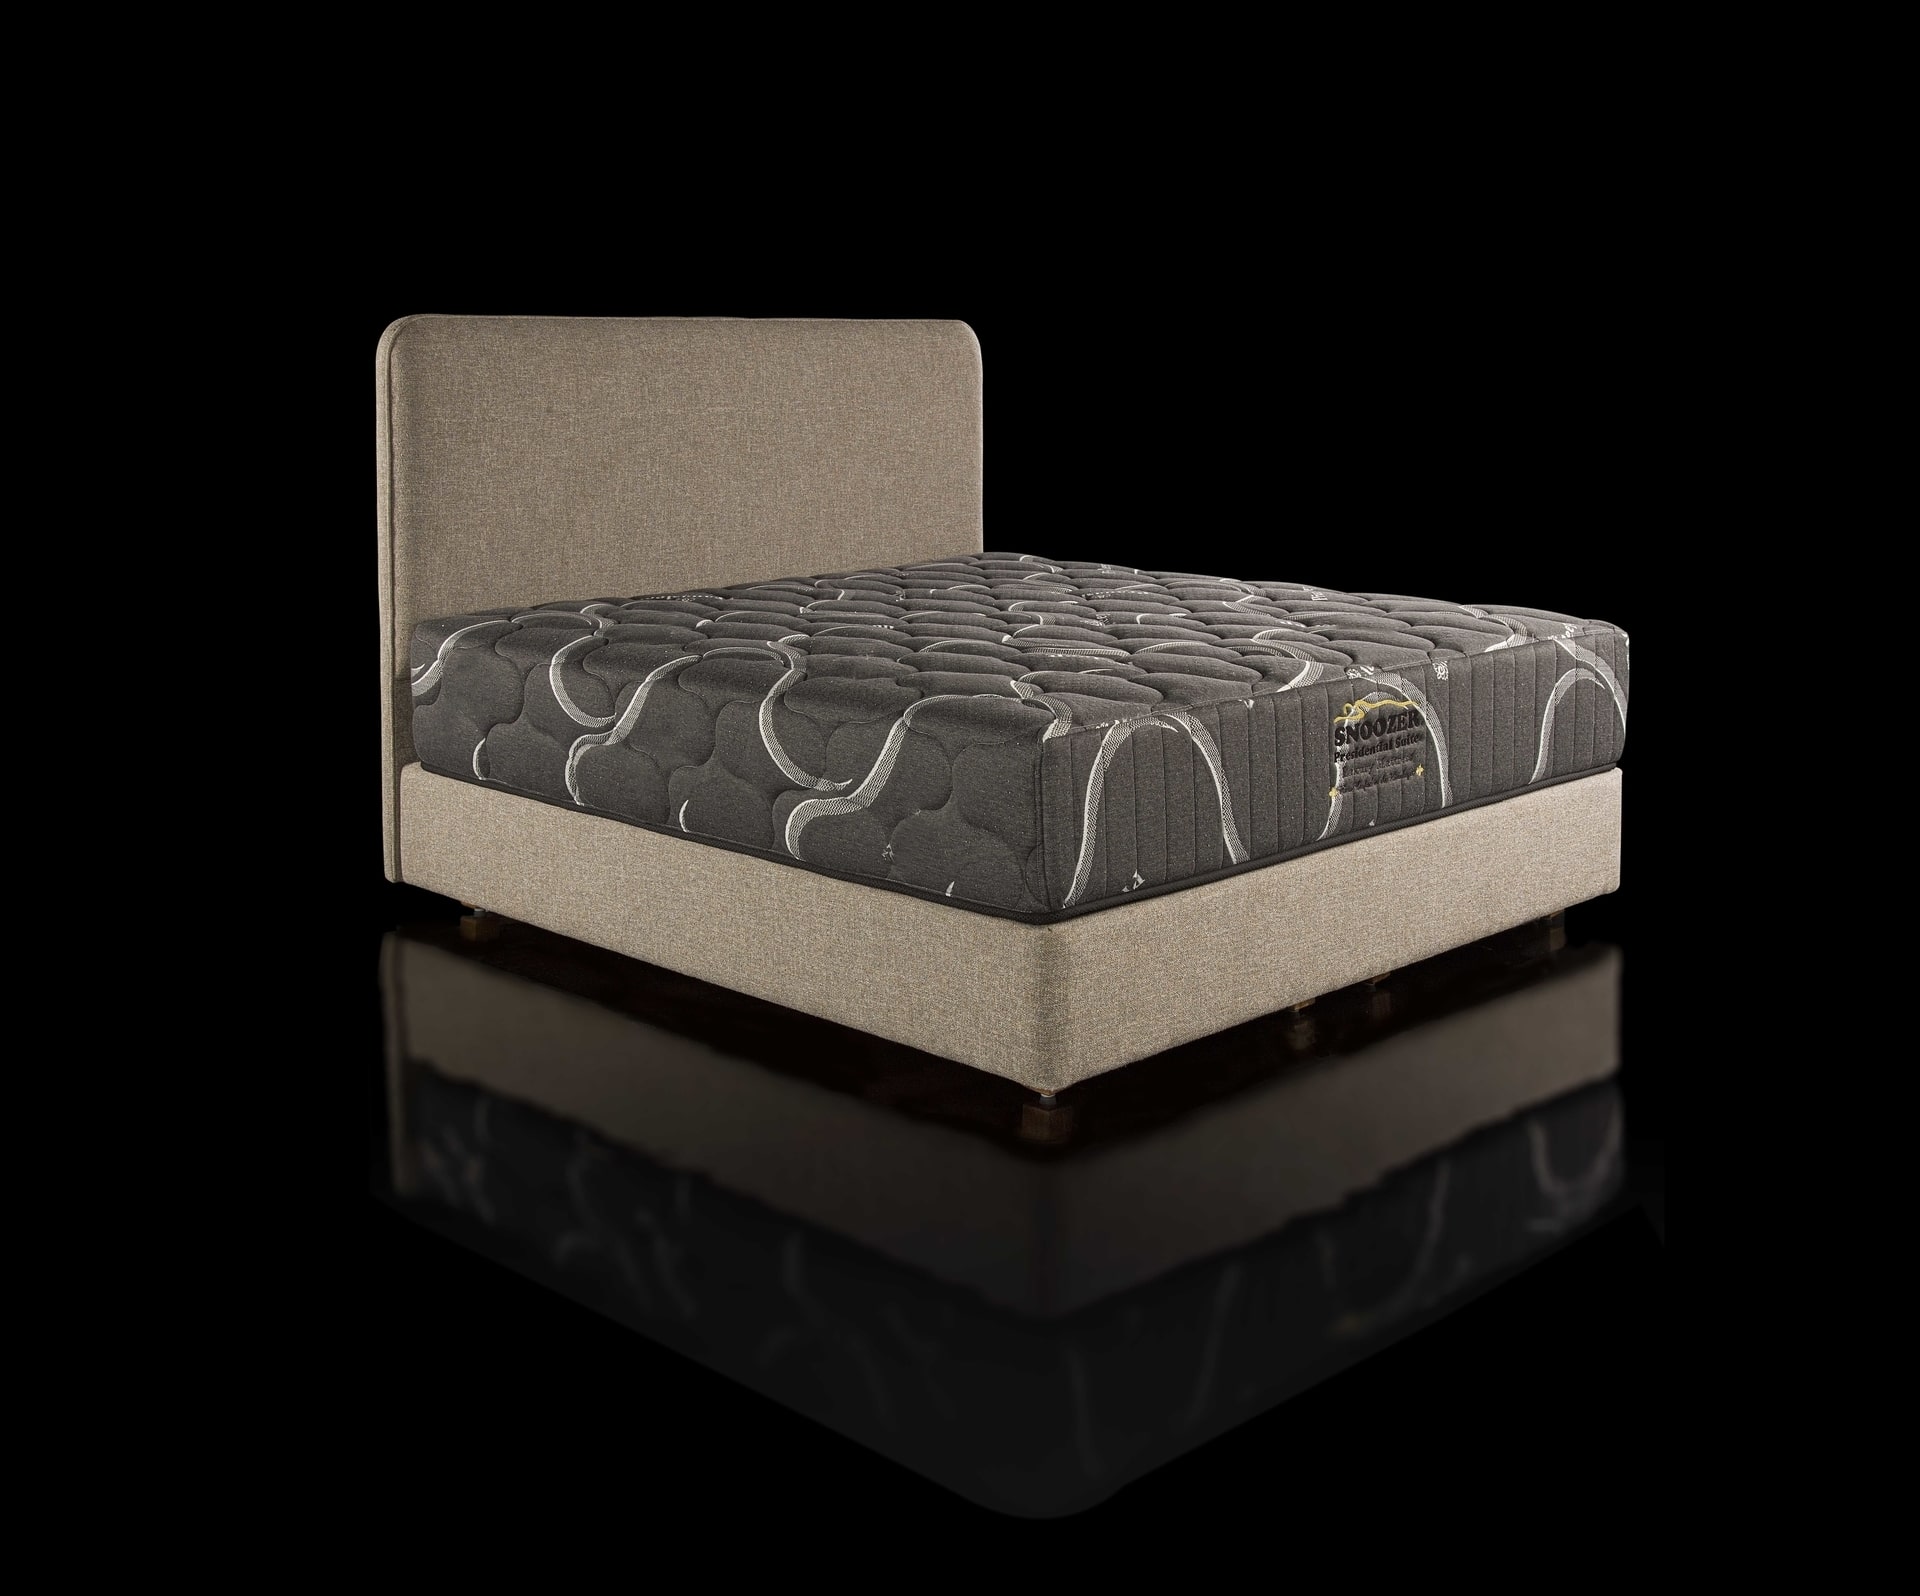 Snoozer Presidential Suite Mattress on a Warner Bed